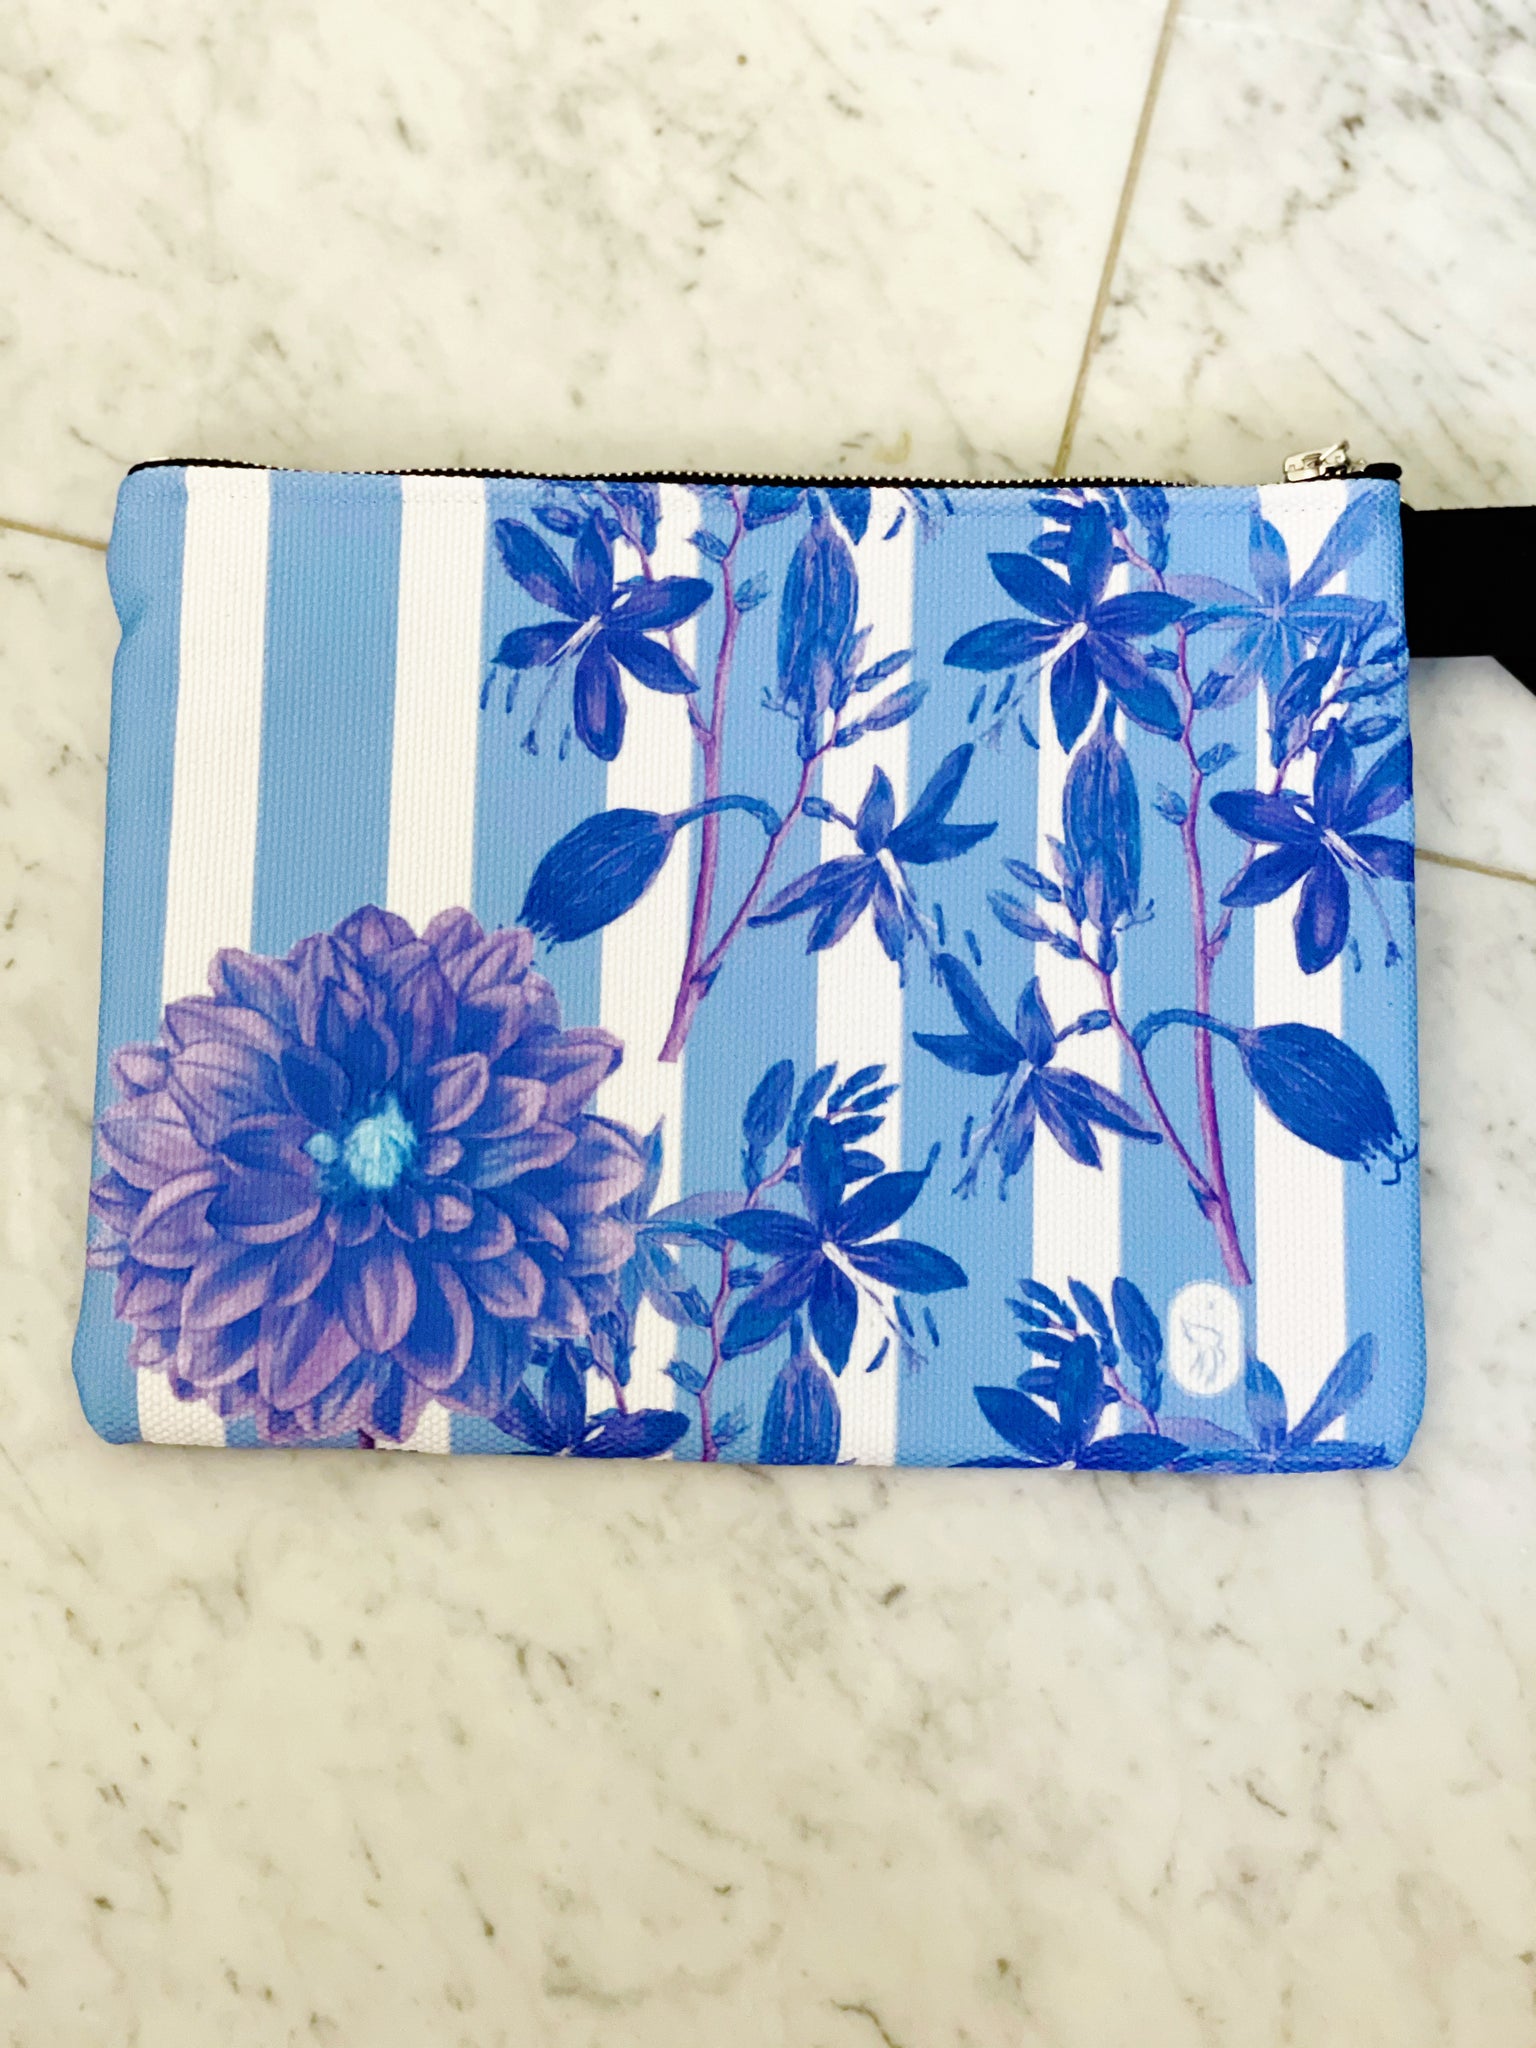 Luxe canvas pouch, fully lined with vegan leather details, featuring our blue stripes and florals print with the word "Goddess" on the front.